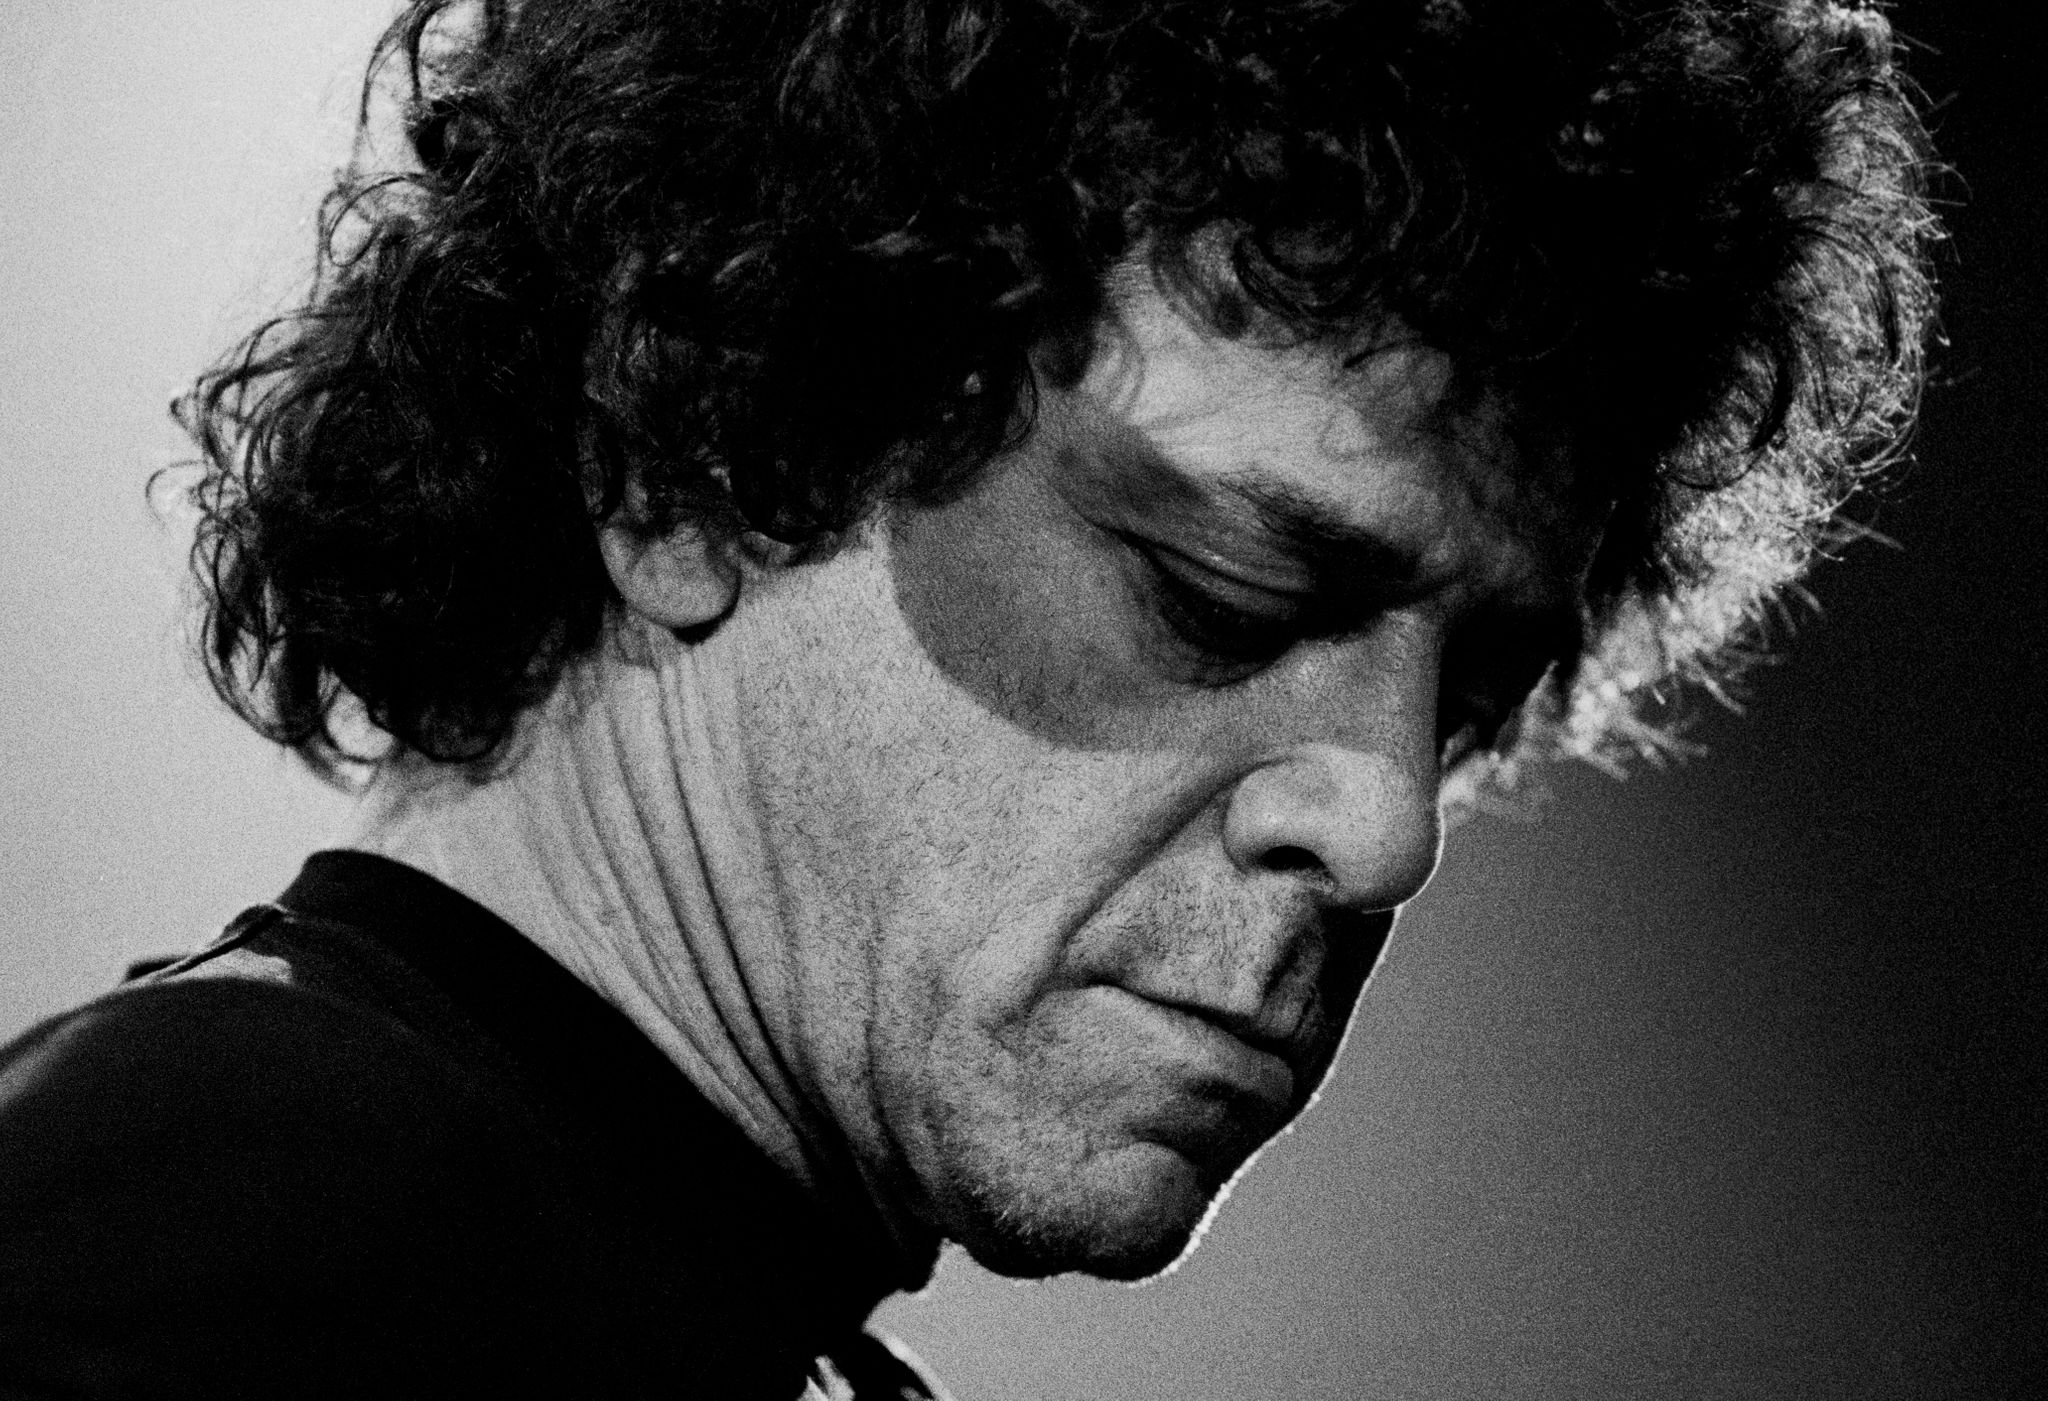 Relentless F*cking Noise”: Lou Reed on Making an Unlistenable